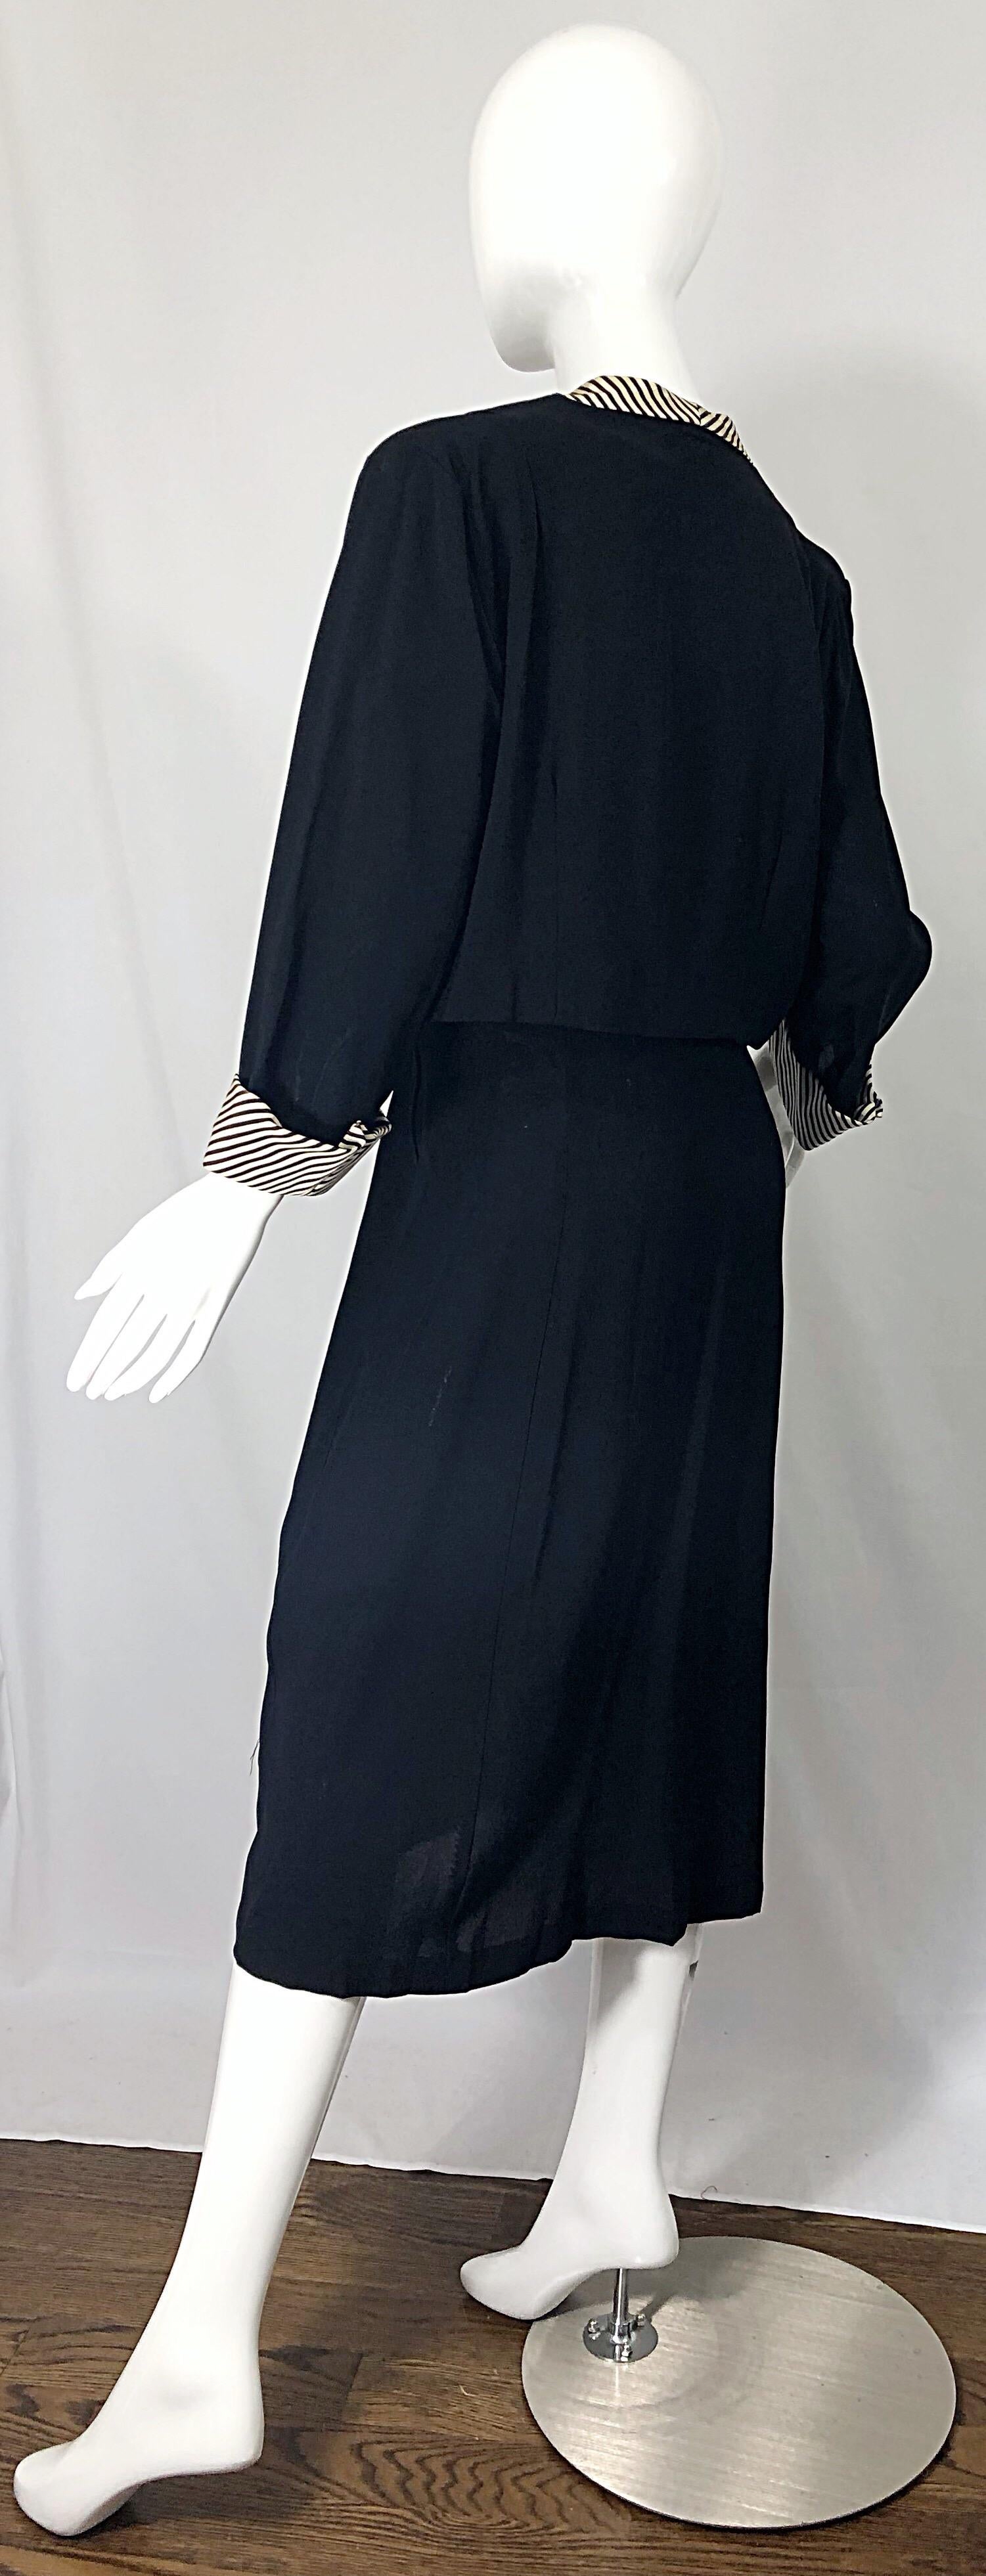 1940s Plus Size 20 / 22 Black and White Crepe Rhinestone 40s Dress and Jacket For Sale 5